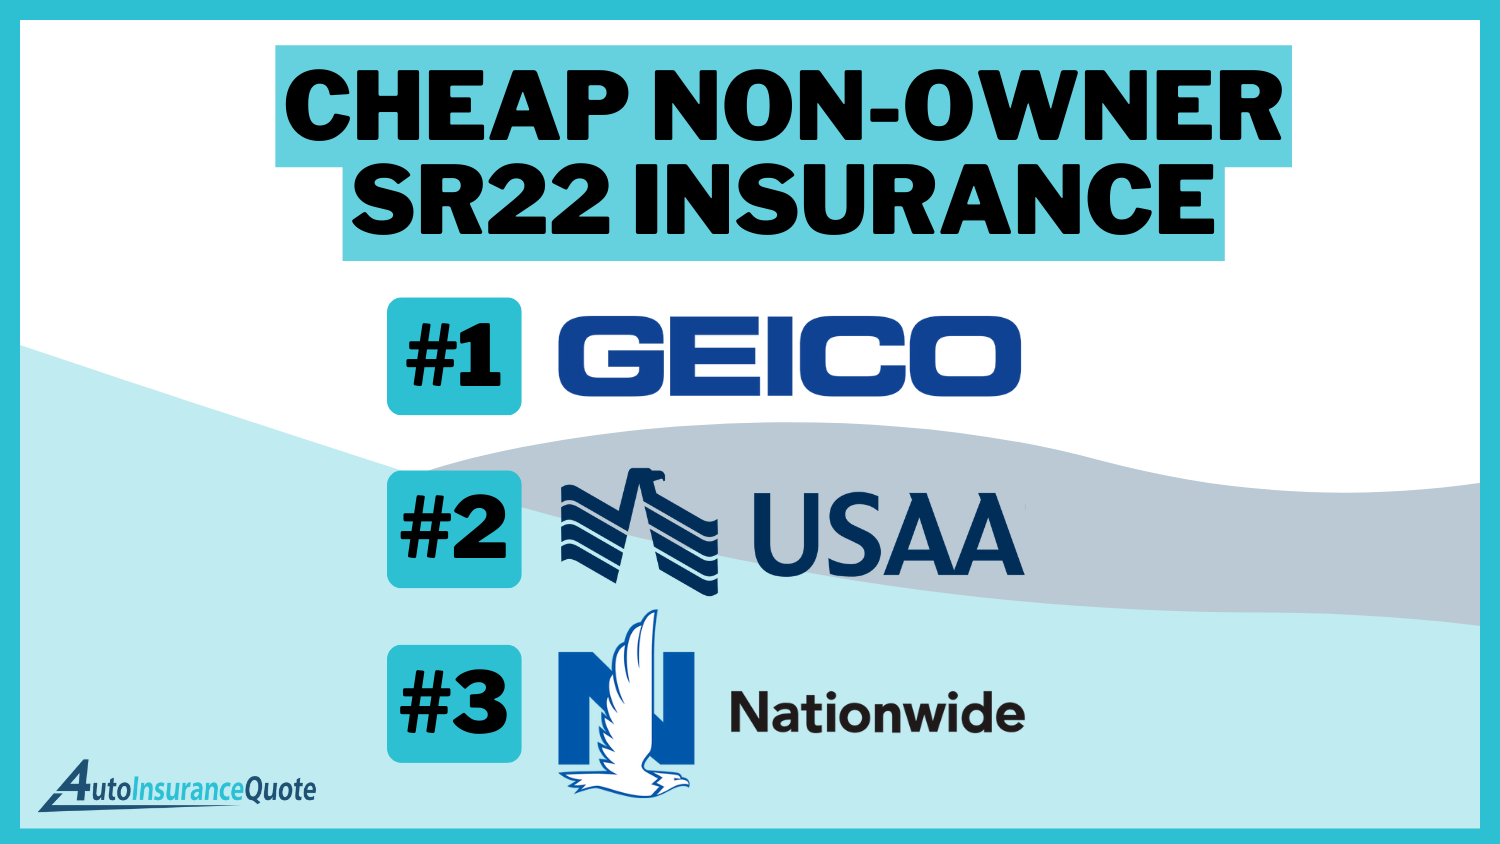 Cheap Non-Owner SR22 Insurance : Geico, USAA, Nationwide